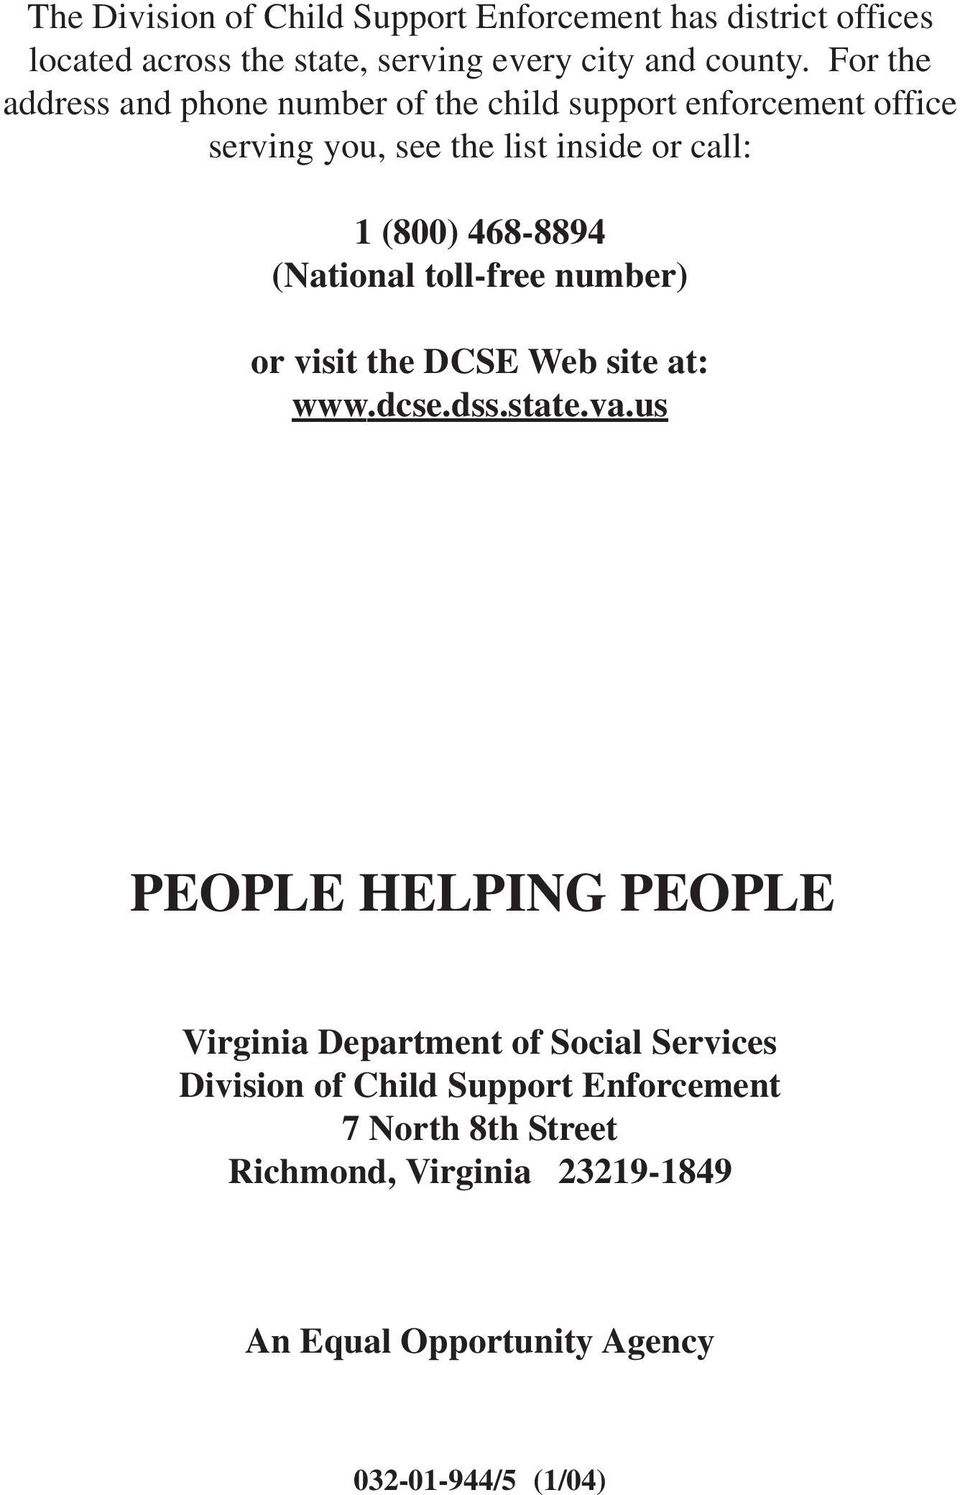 (National toll-free number) or visit the DCSE Web site at: www.dcse.dss.state.va.